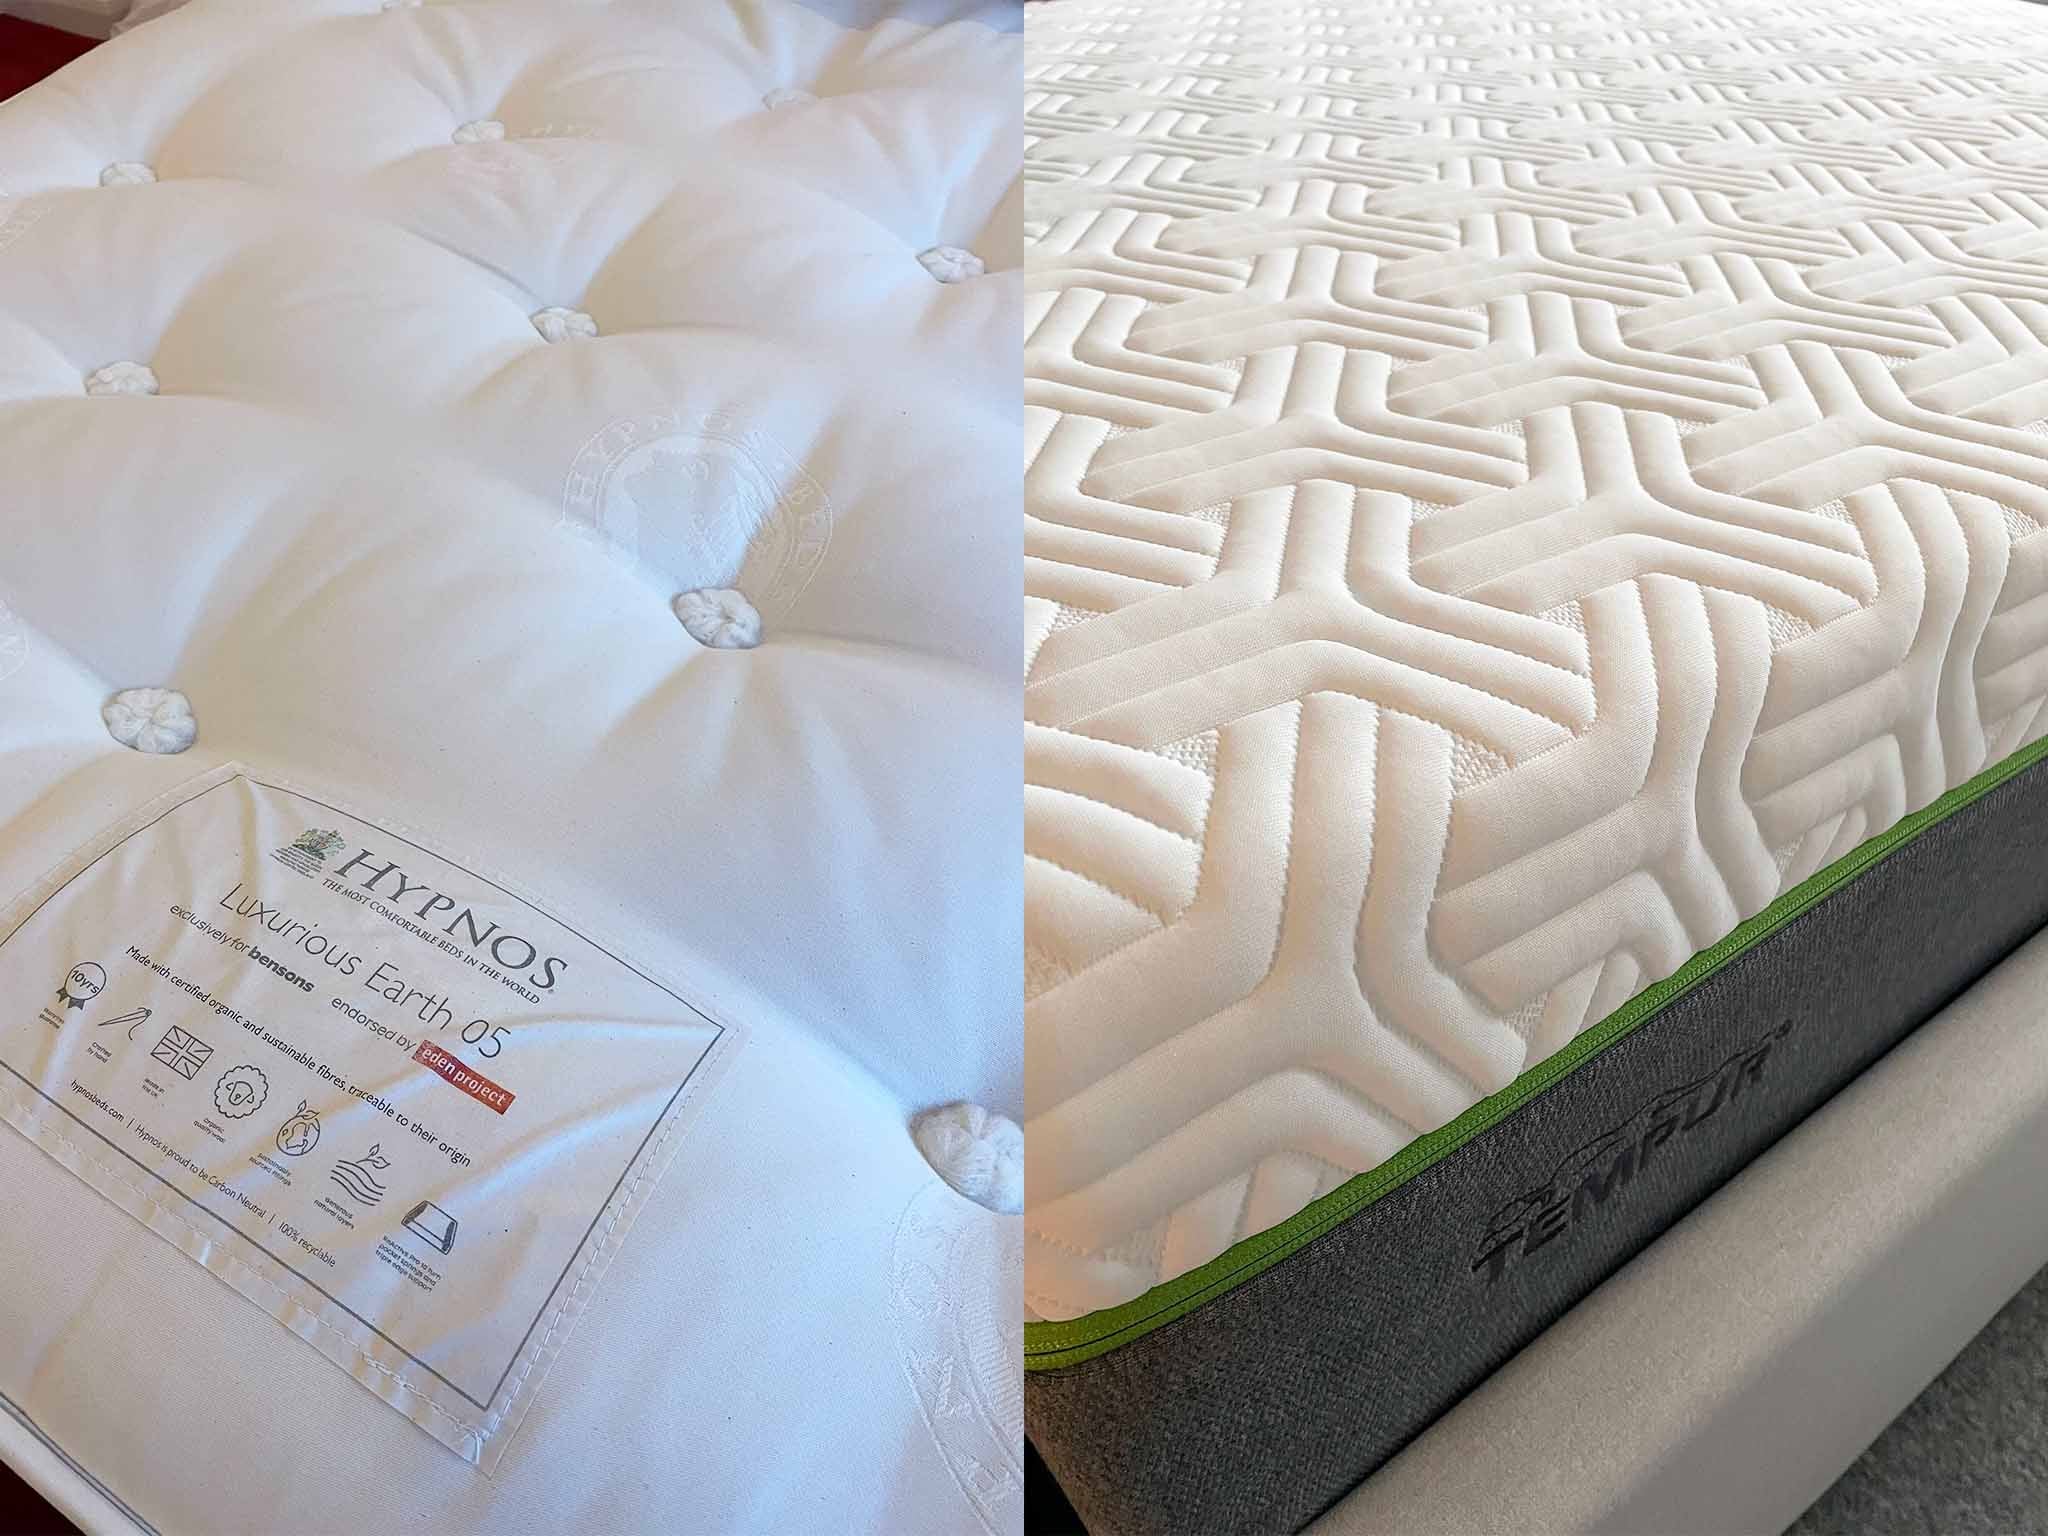 A selection of the best mattresses we tested for this review